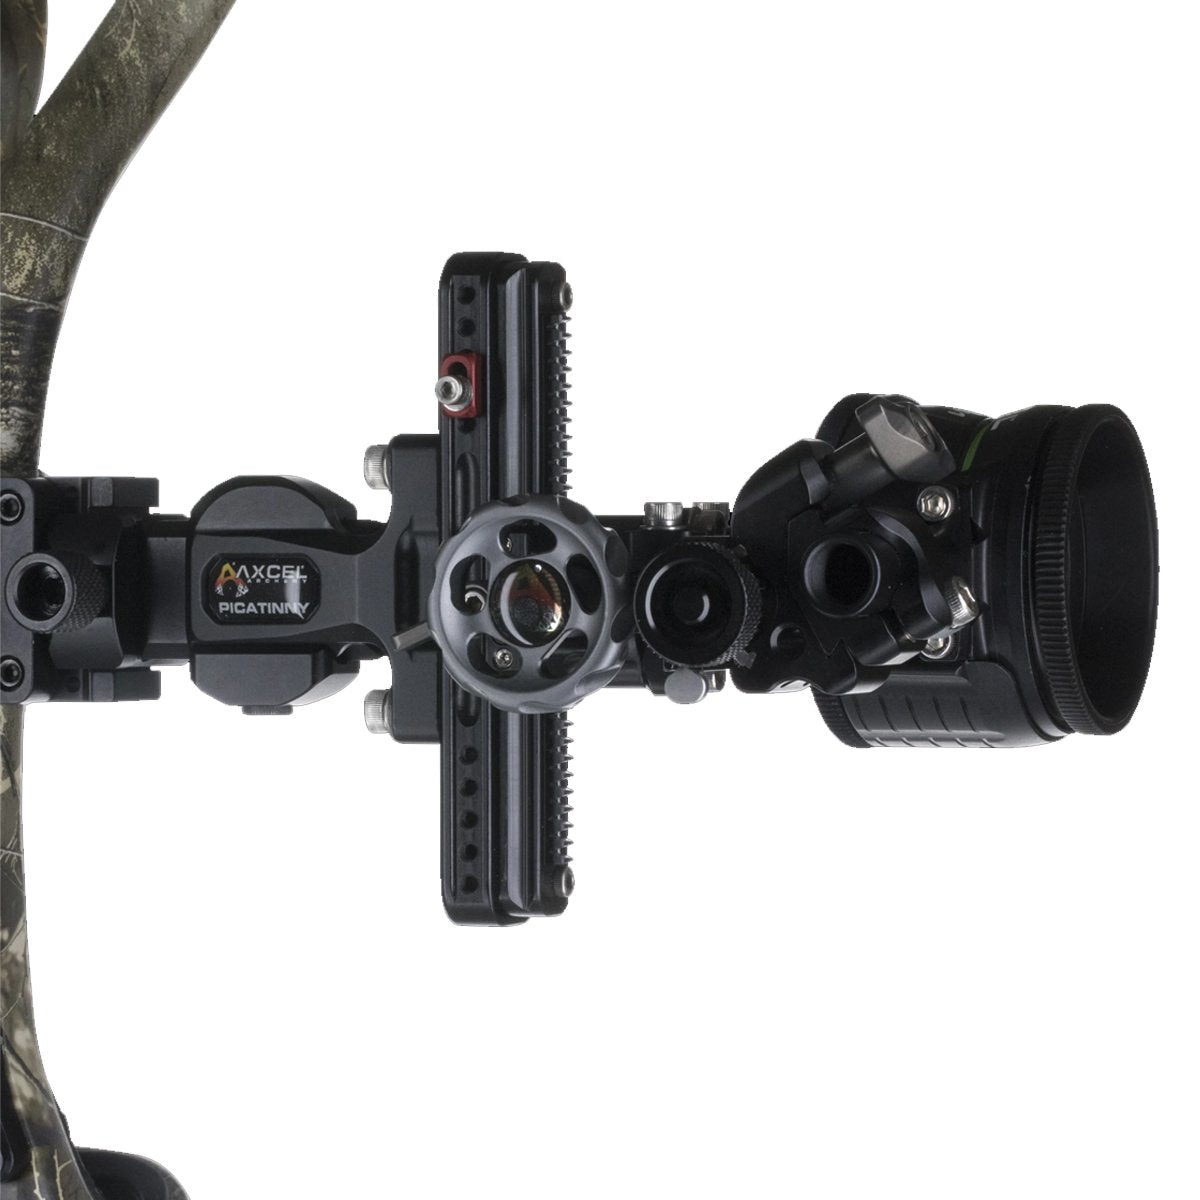 Axcel Landslyde Slider Picatinny Accustat II 3 Pin Bow Sight in  by GOHUNT | Axcel - GOHUNT Shop